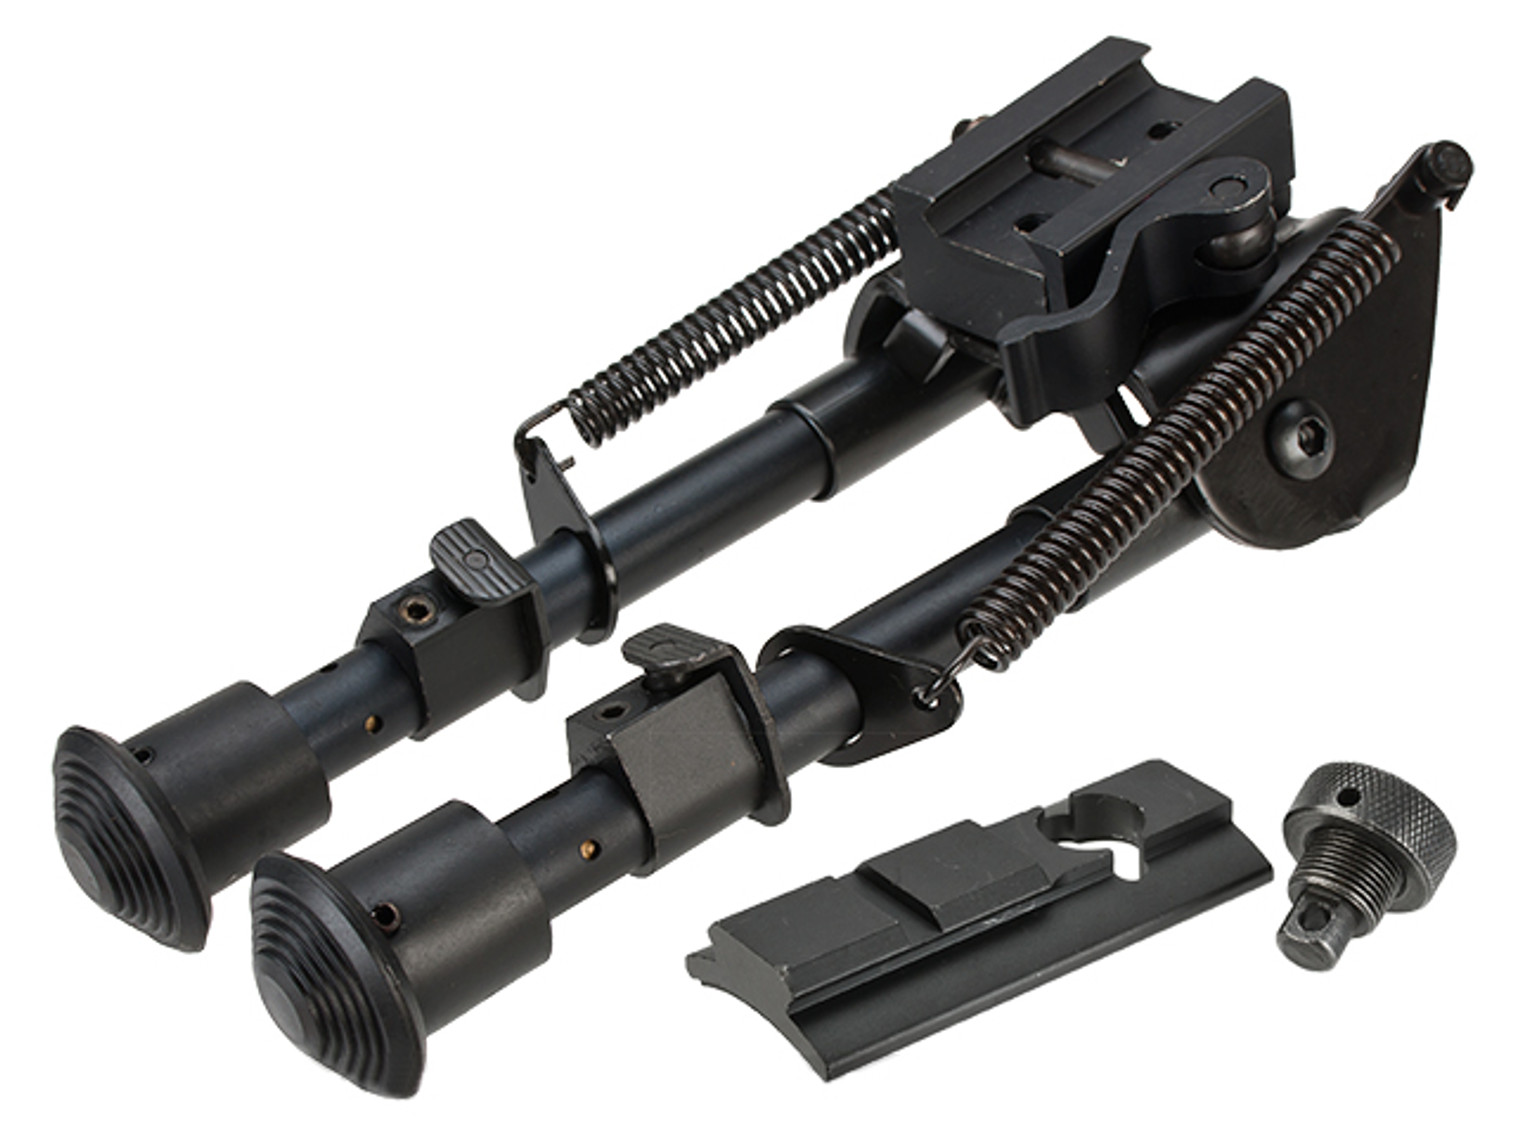 All-Platform Real Steel Retractable Harris Type Bipod (RIS + Stud Sniper Mount) by AIM Sports / NcStar